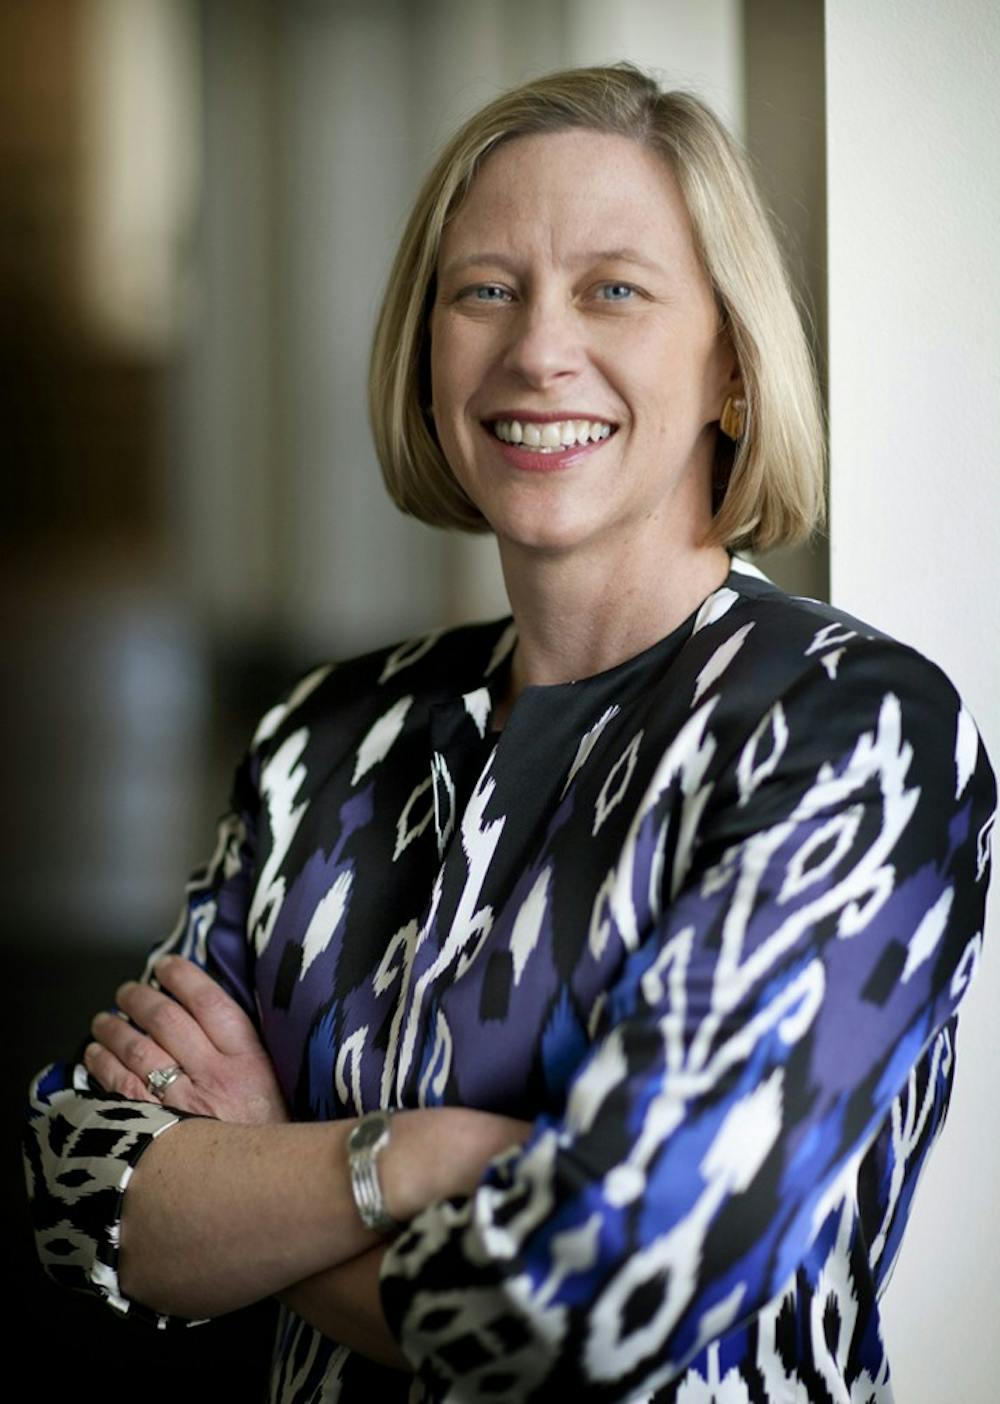 <p>Starting out at the University of&nbsp;Texas, McInnis said one of her main objectives will be meeting people from various areas within the school.</p>